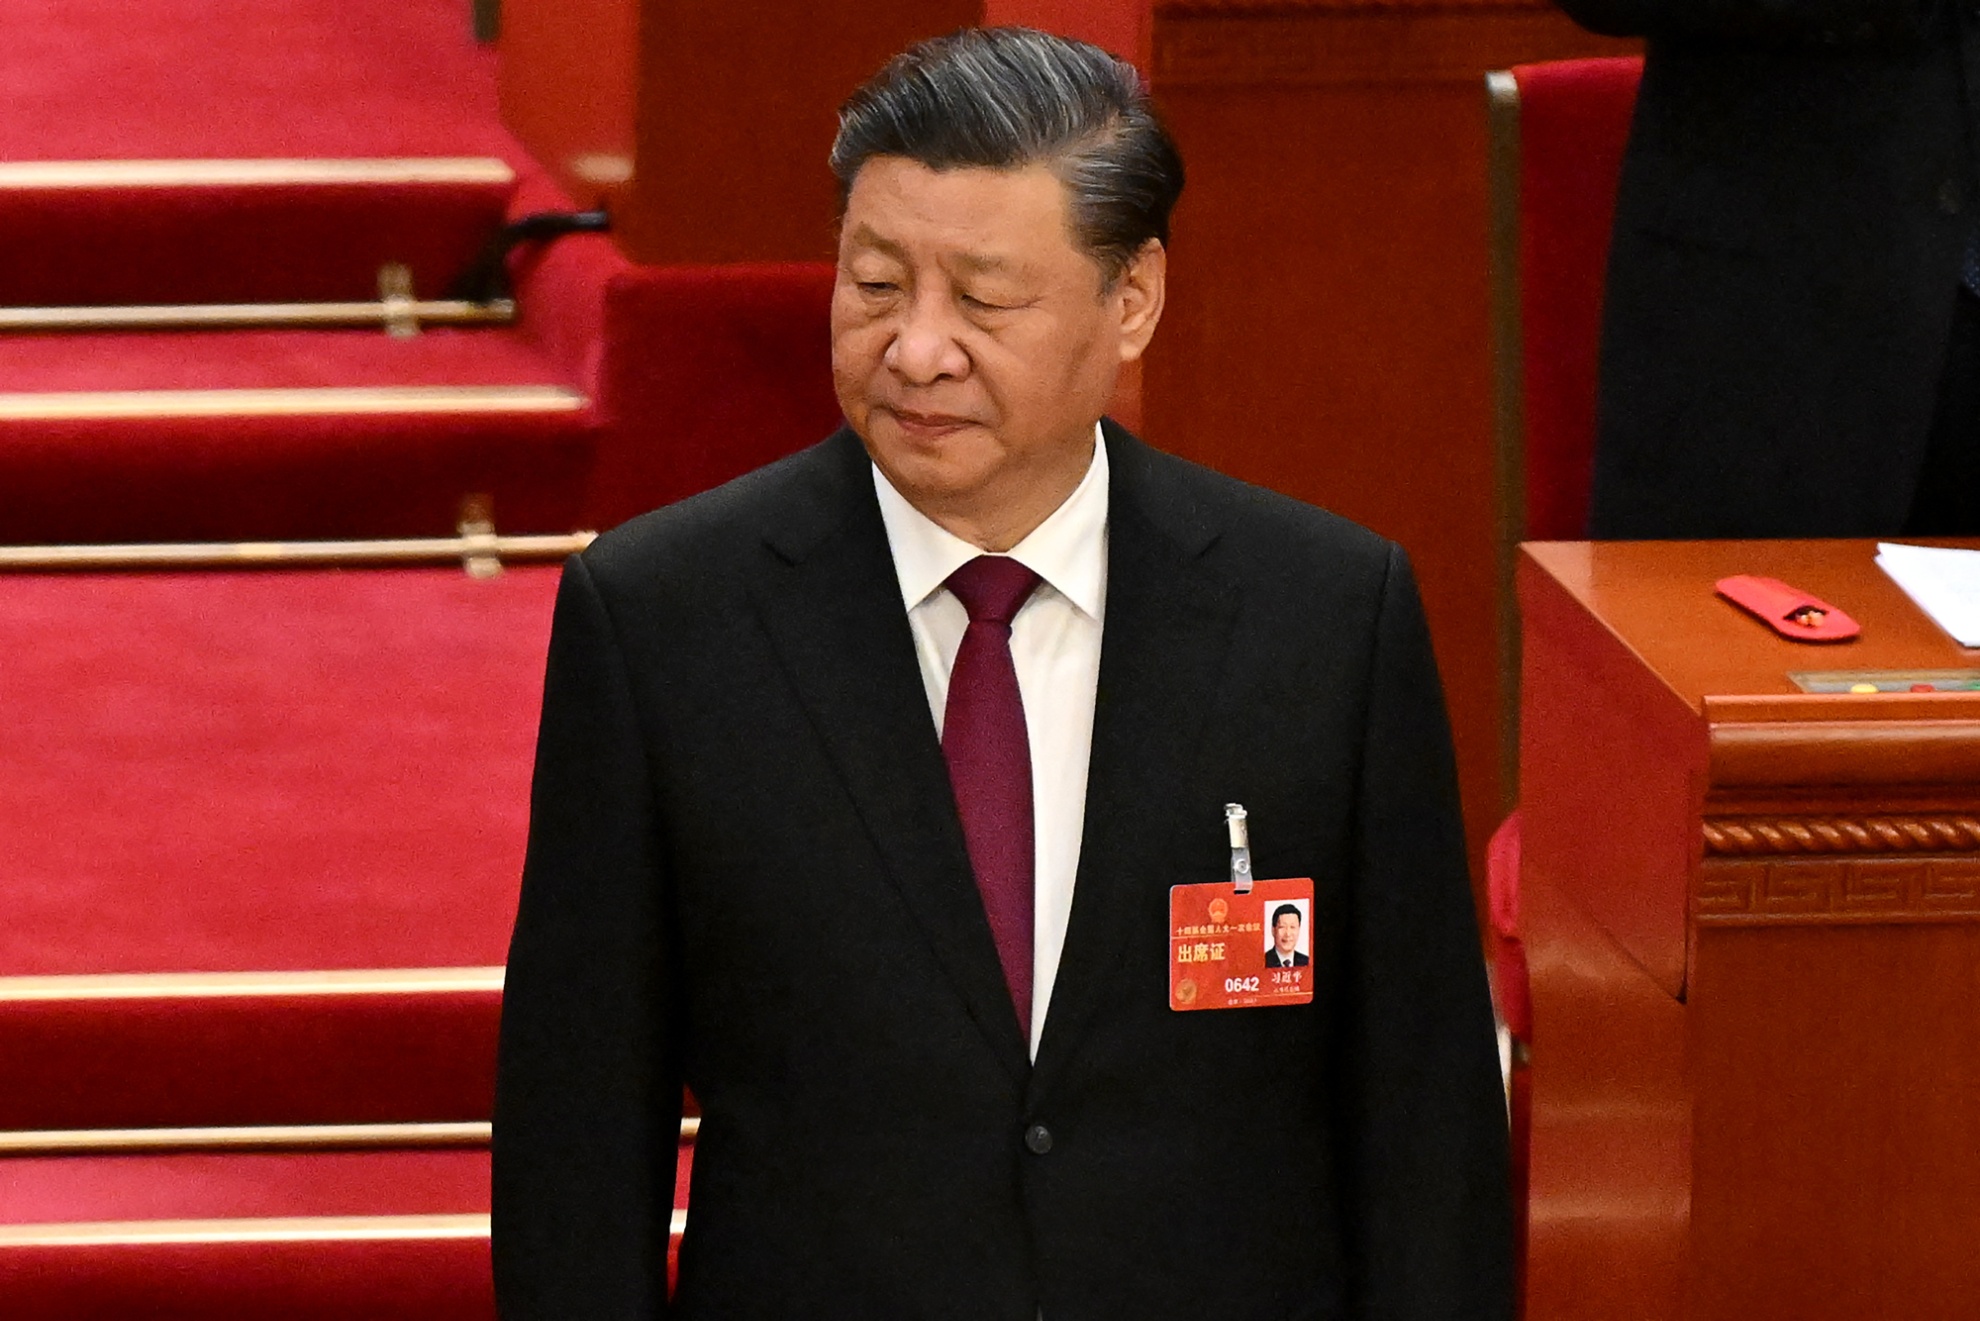 Xi Jinping on March 10.